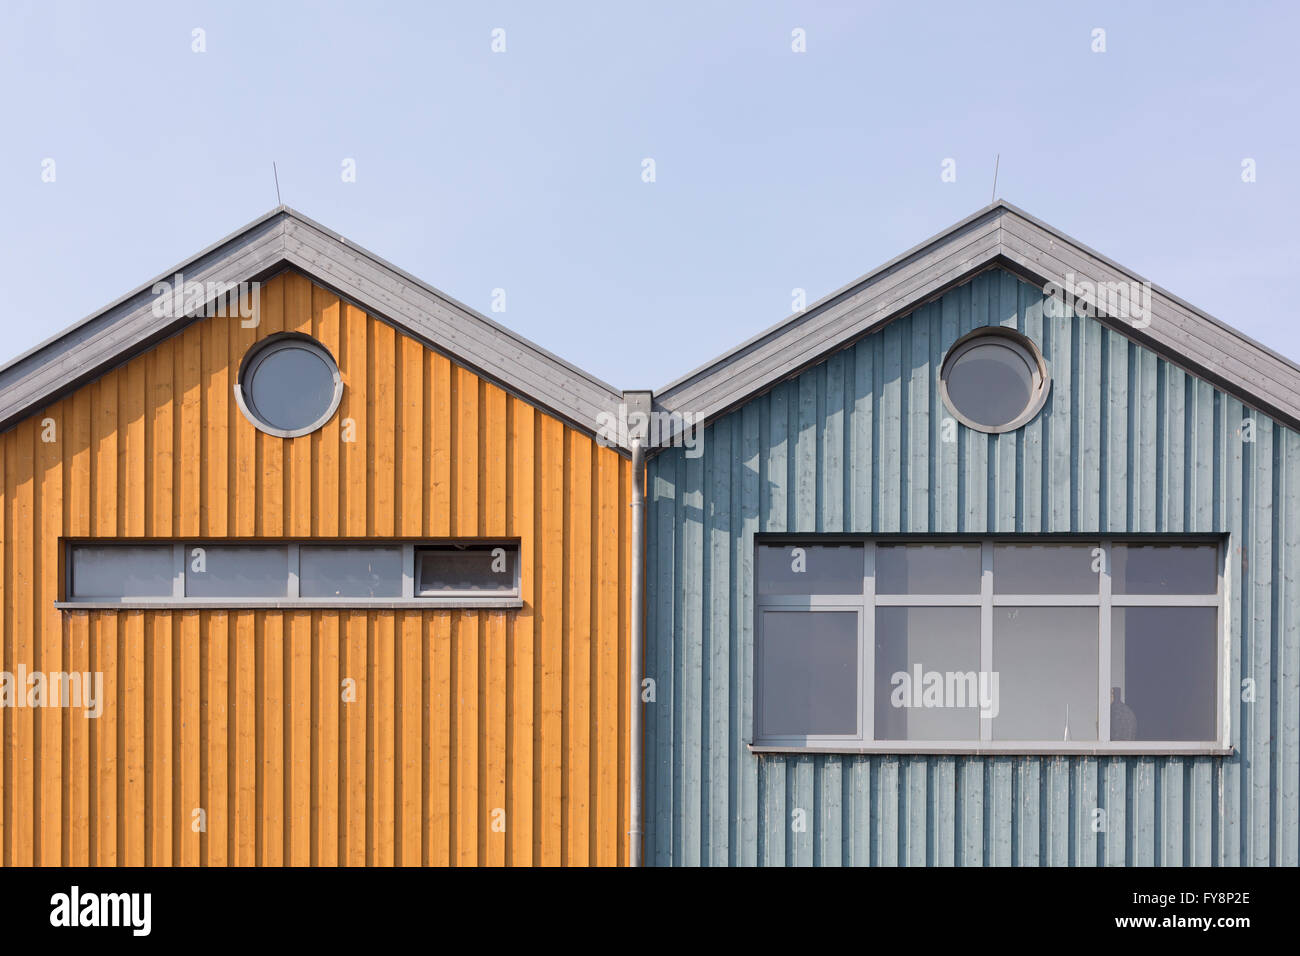 Germany, Warnemuende, two wooden houses side by side Stock Photo